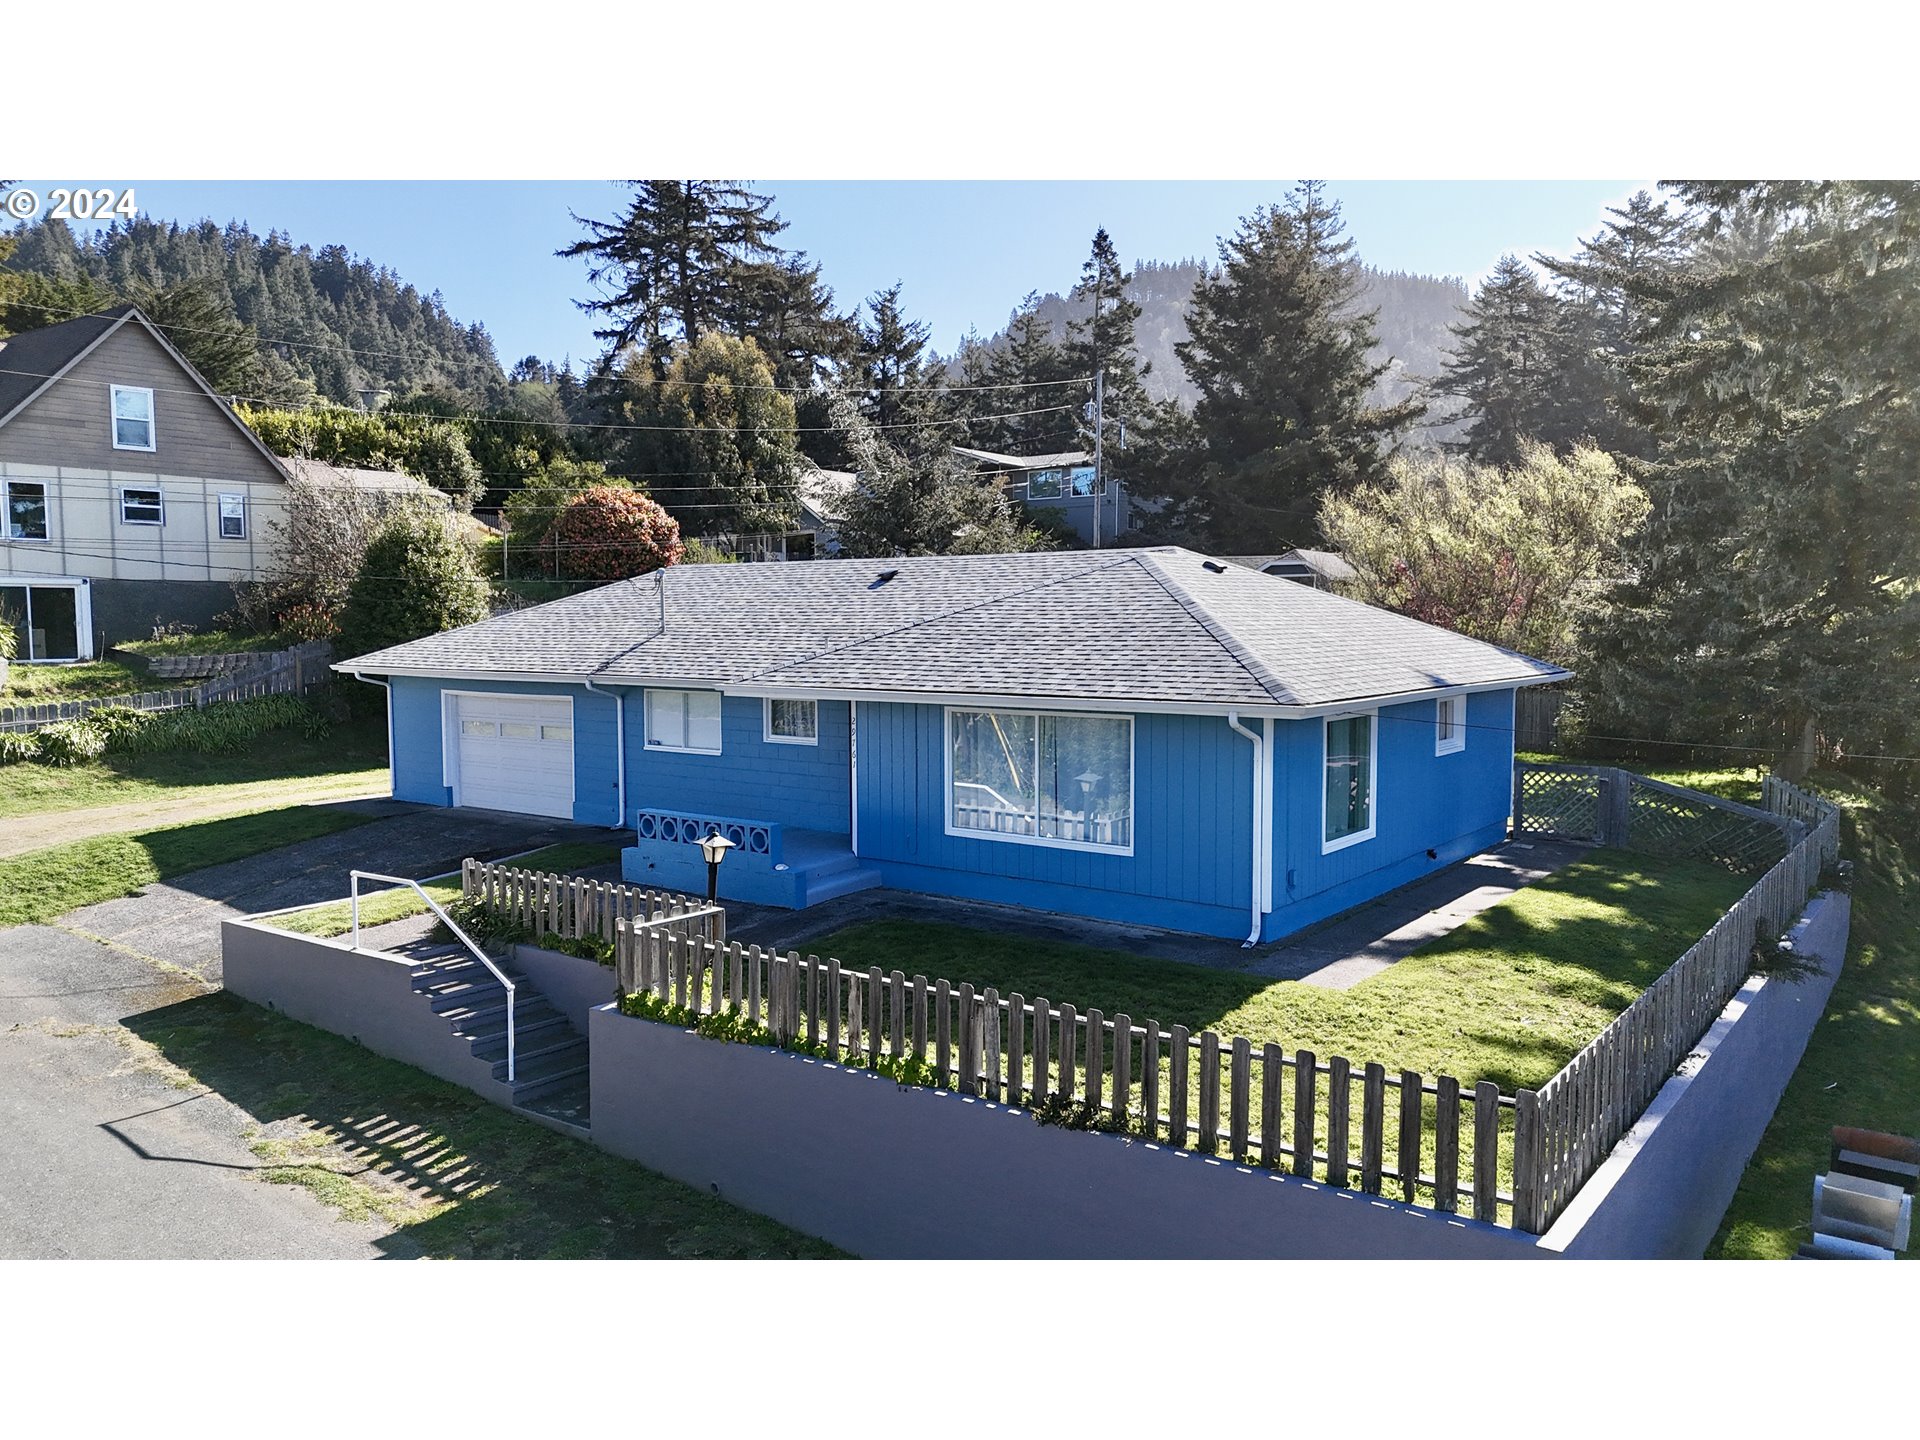 29761 SUTTON ST Gold Beach, Brookings Home Listings - Pacific Coastal Real Estate